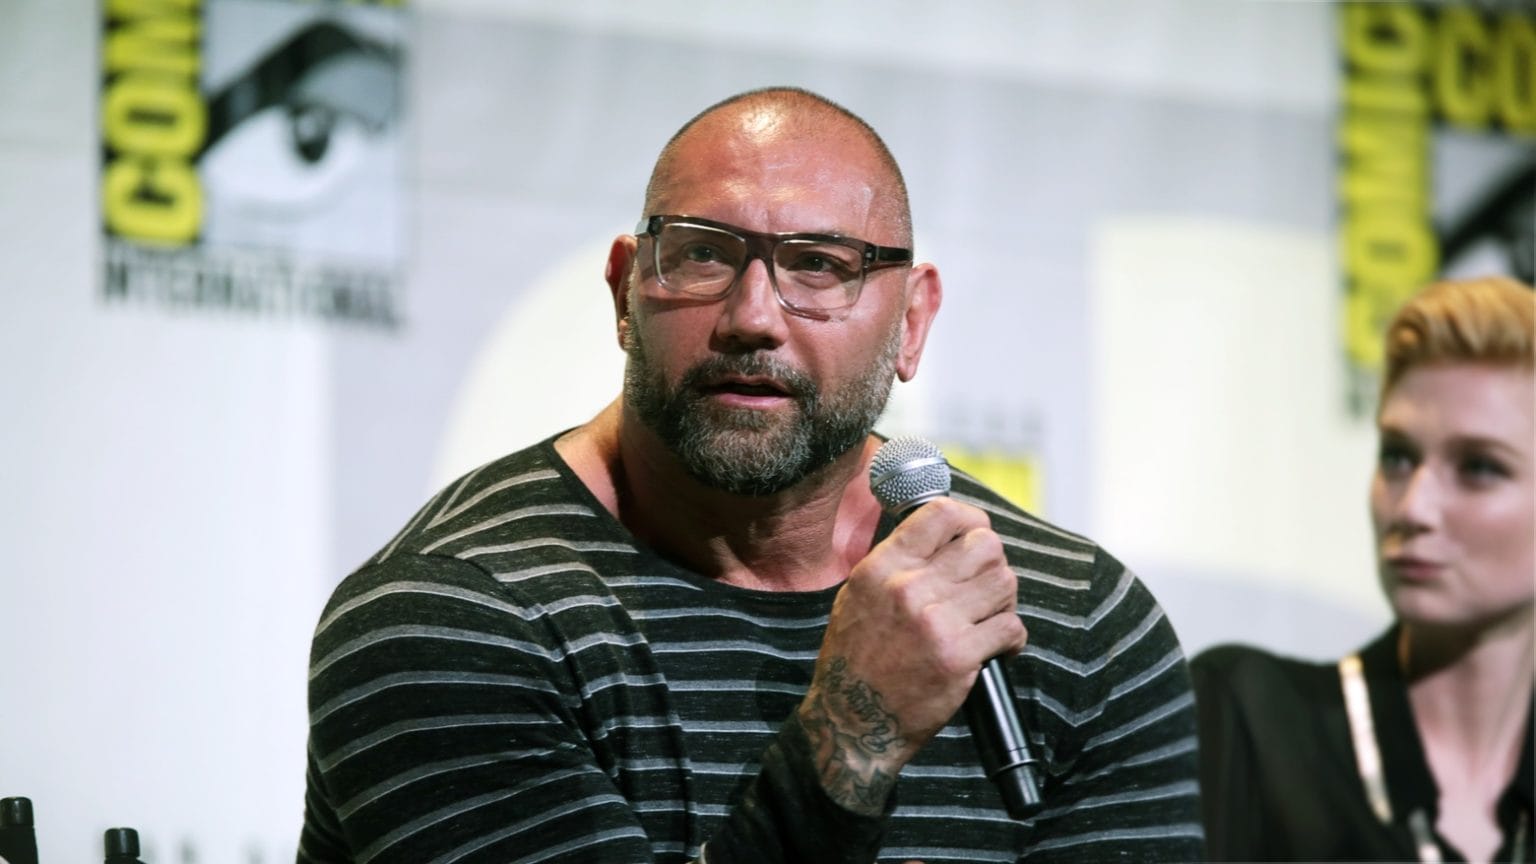 Dave Bautista speaking at the 2016 San Diego Comic Con